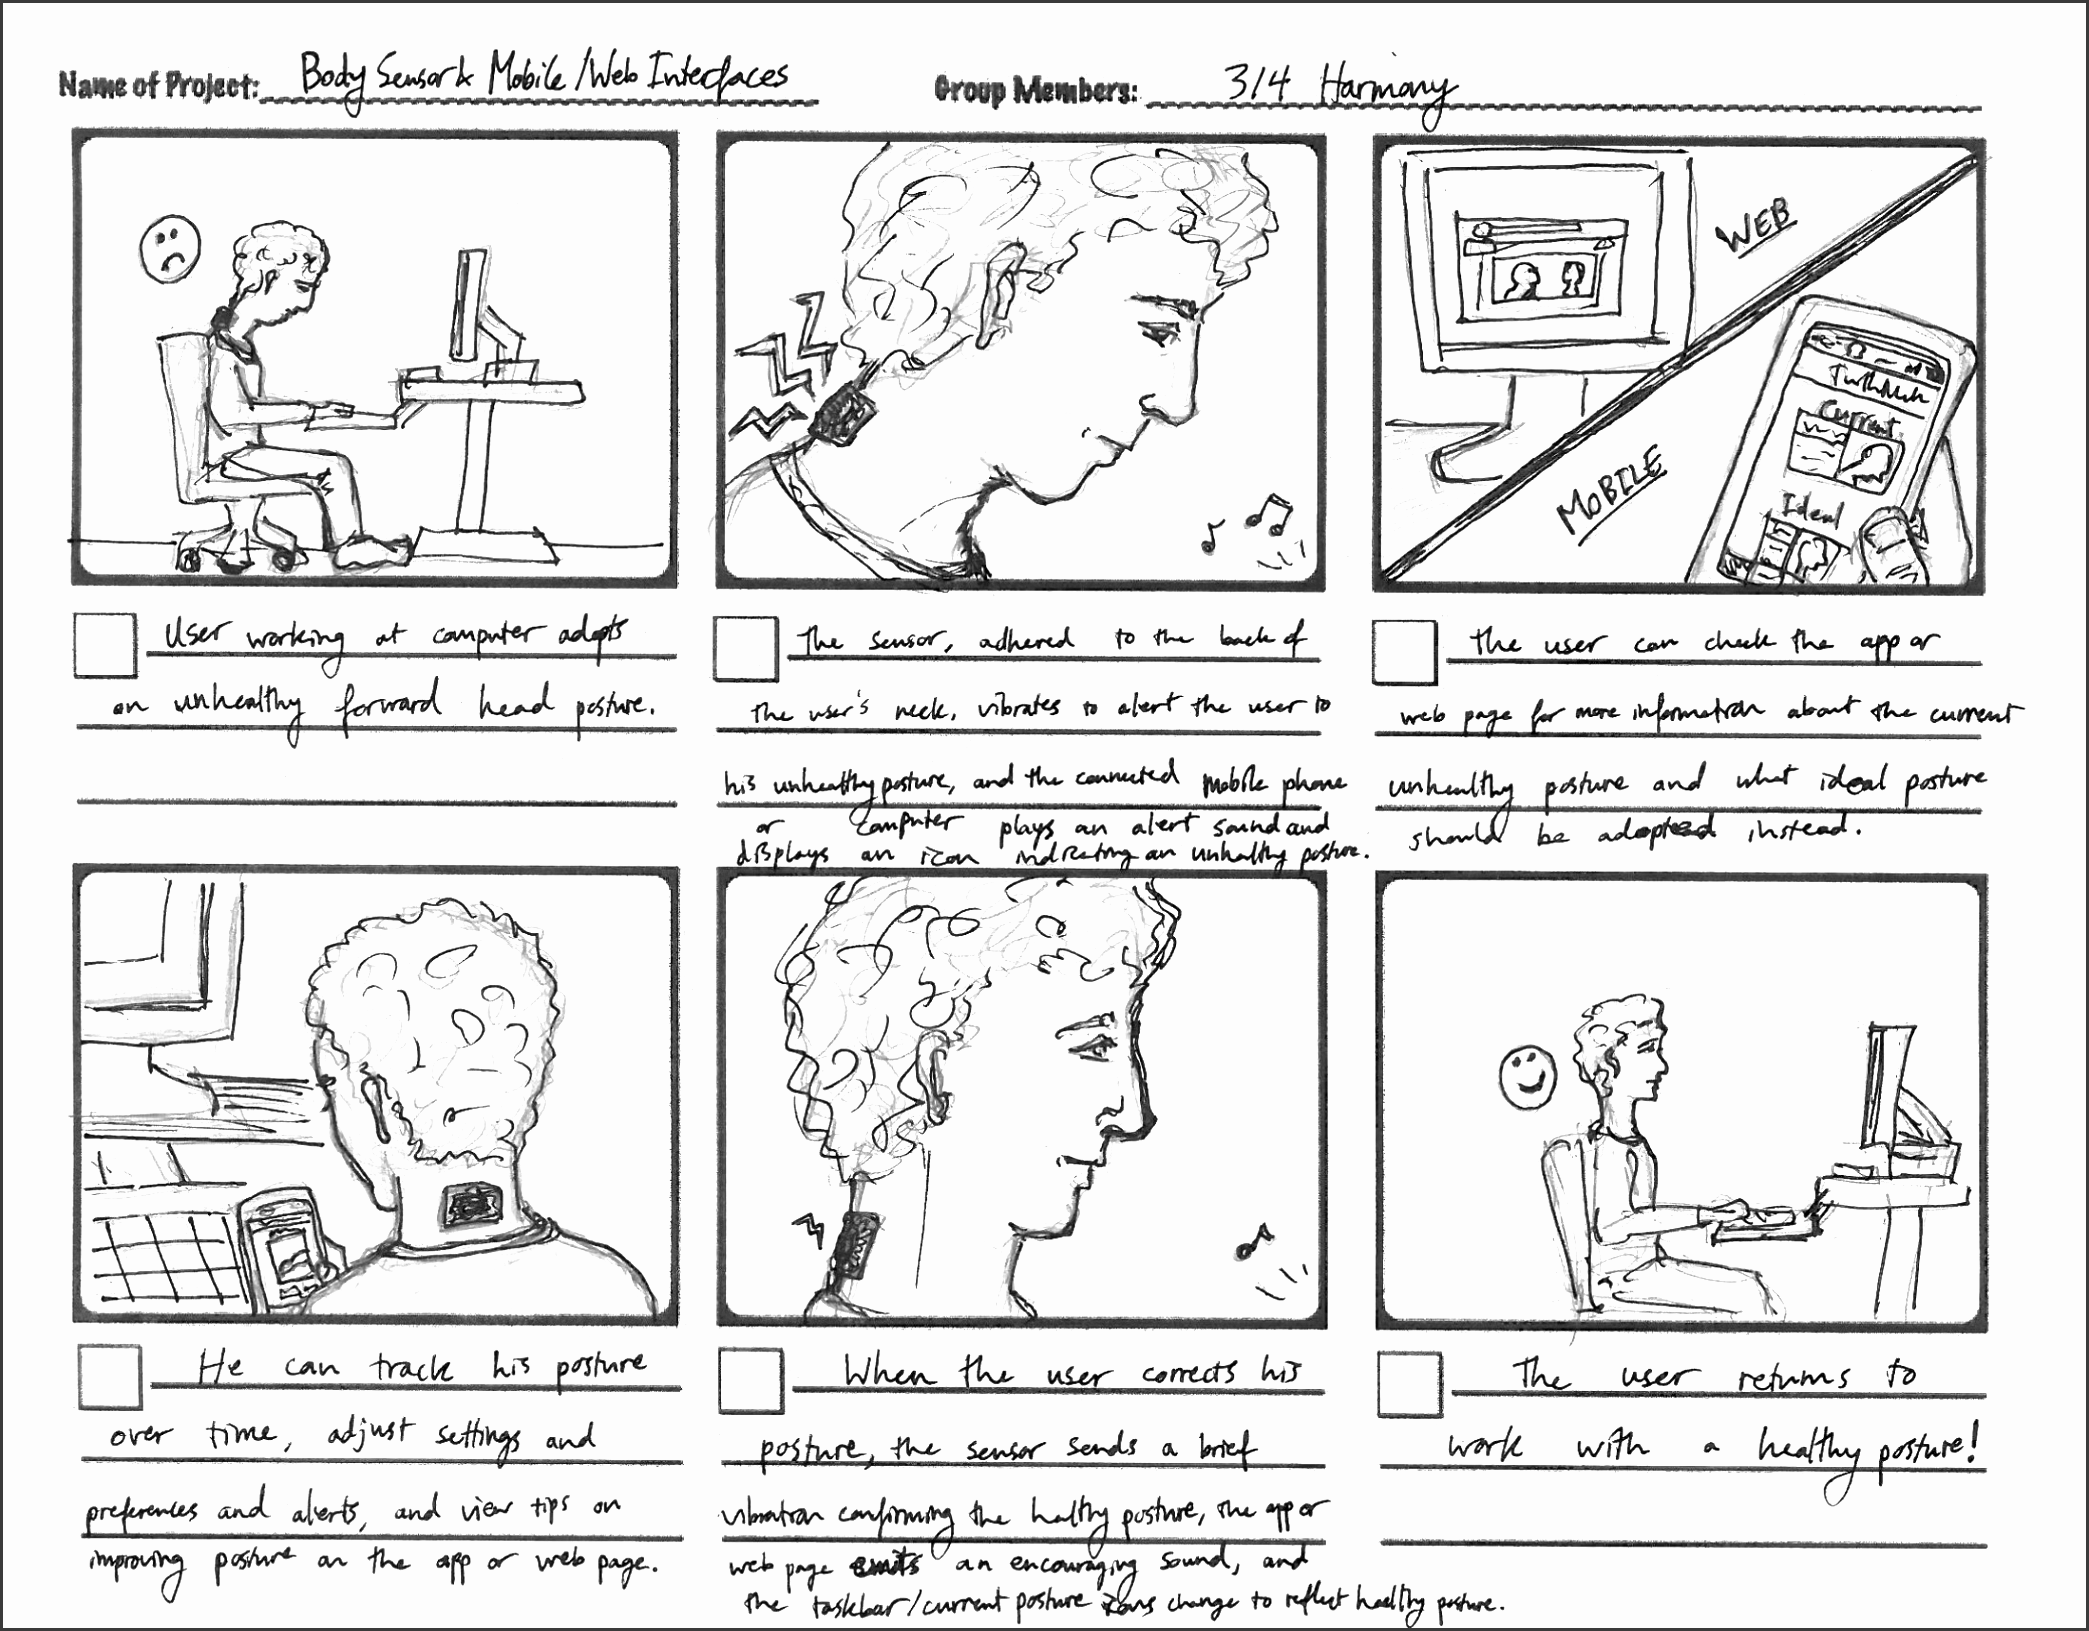 storyboard frames story told in frames image elena marinelli view